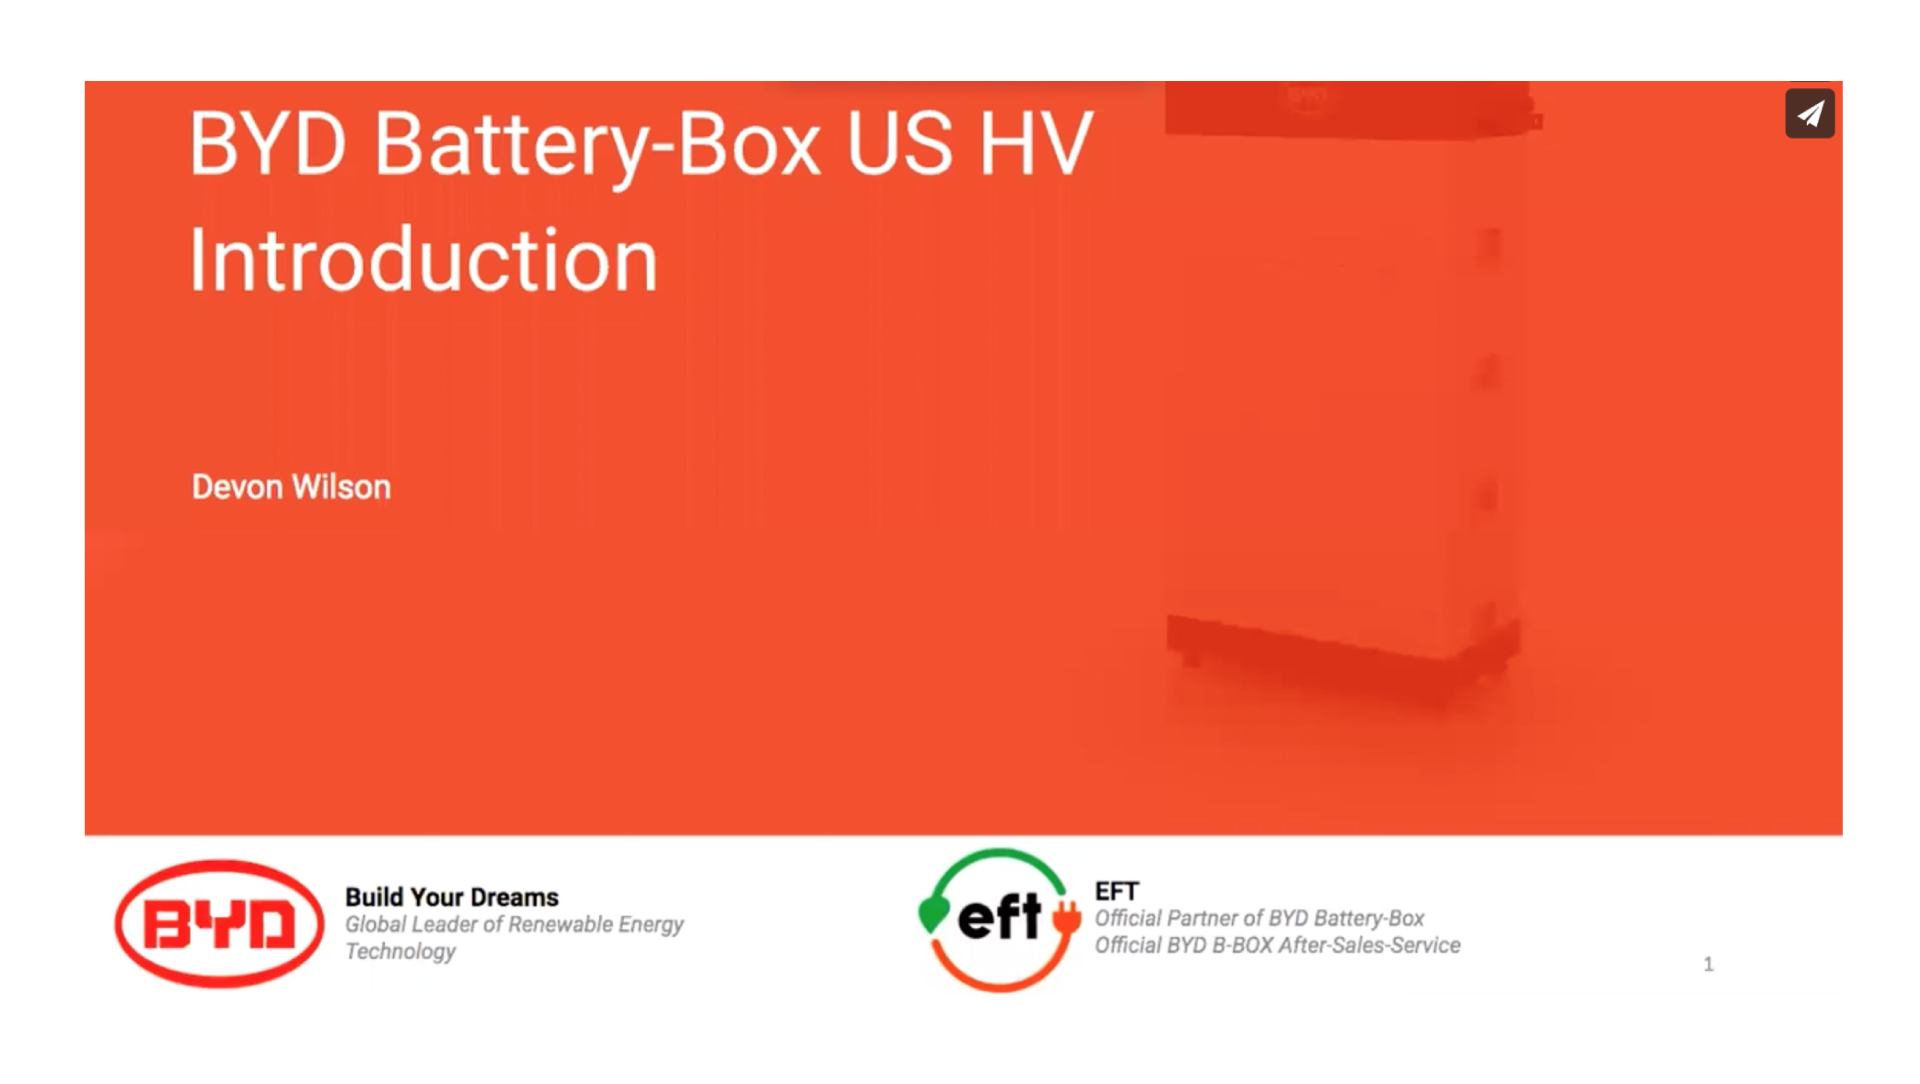 Webinar: Open Up Revenue Streams with the BYD Battery-Box